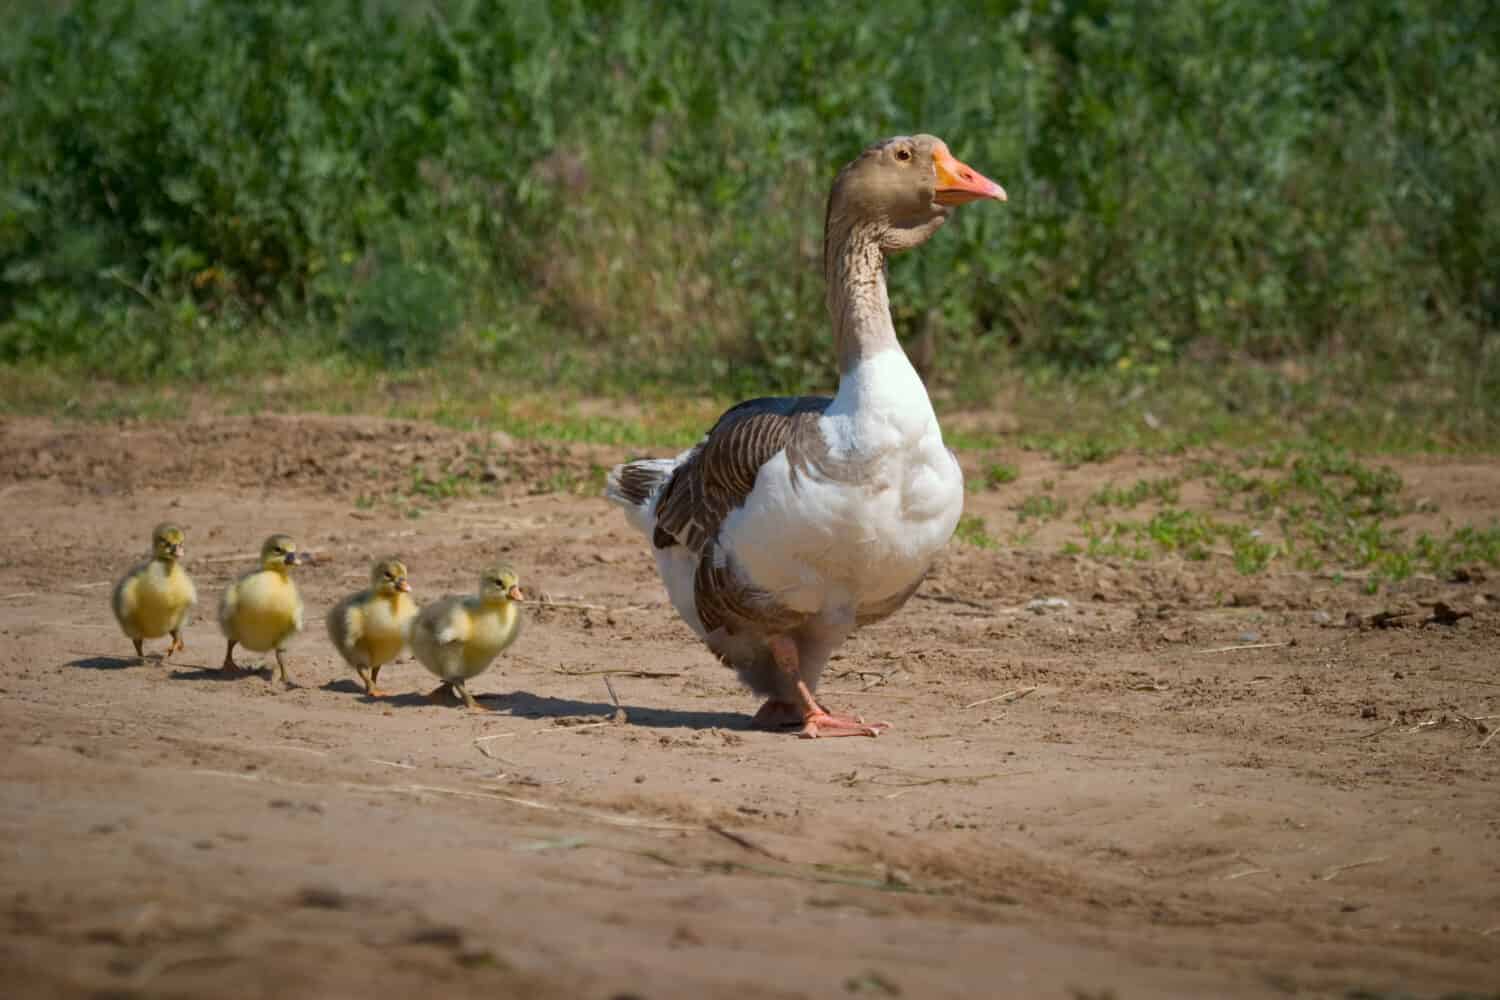 Goose mum leads on the road four small goslings.